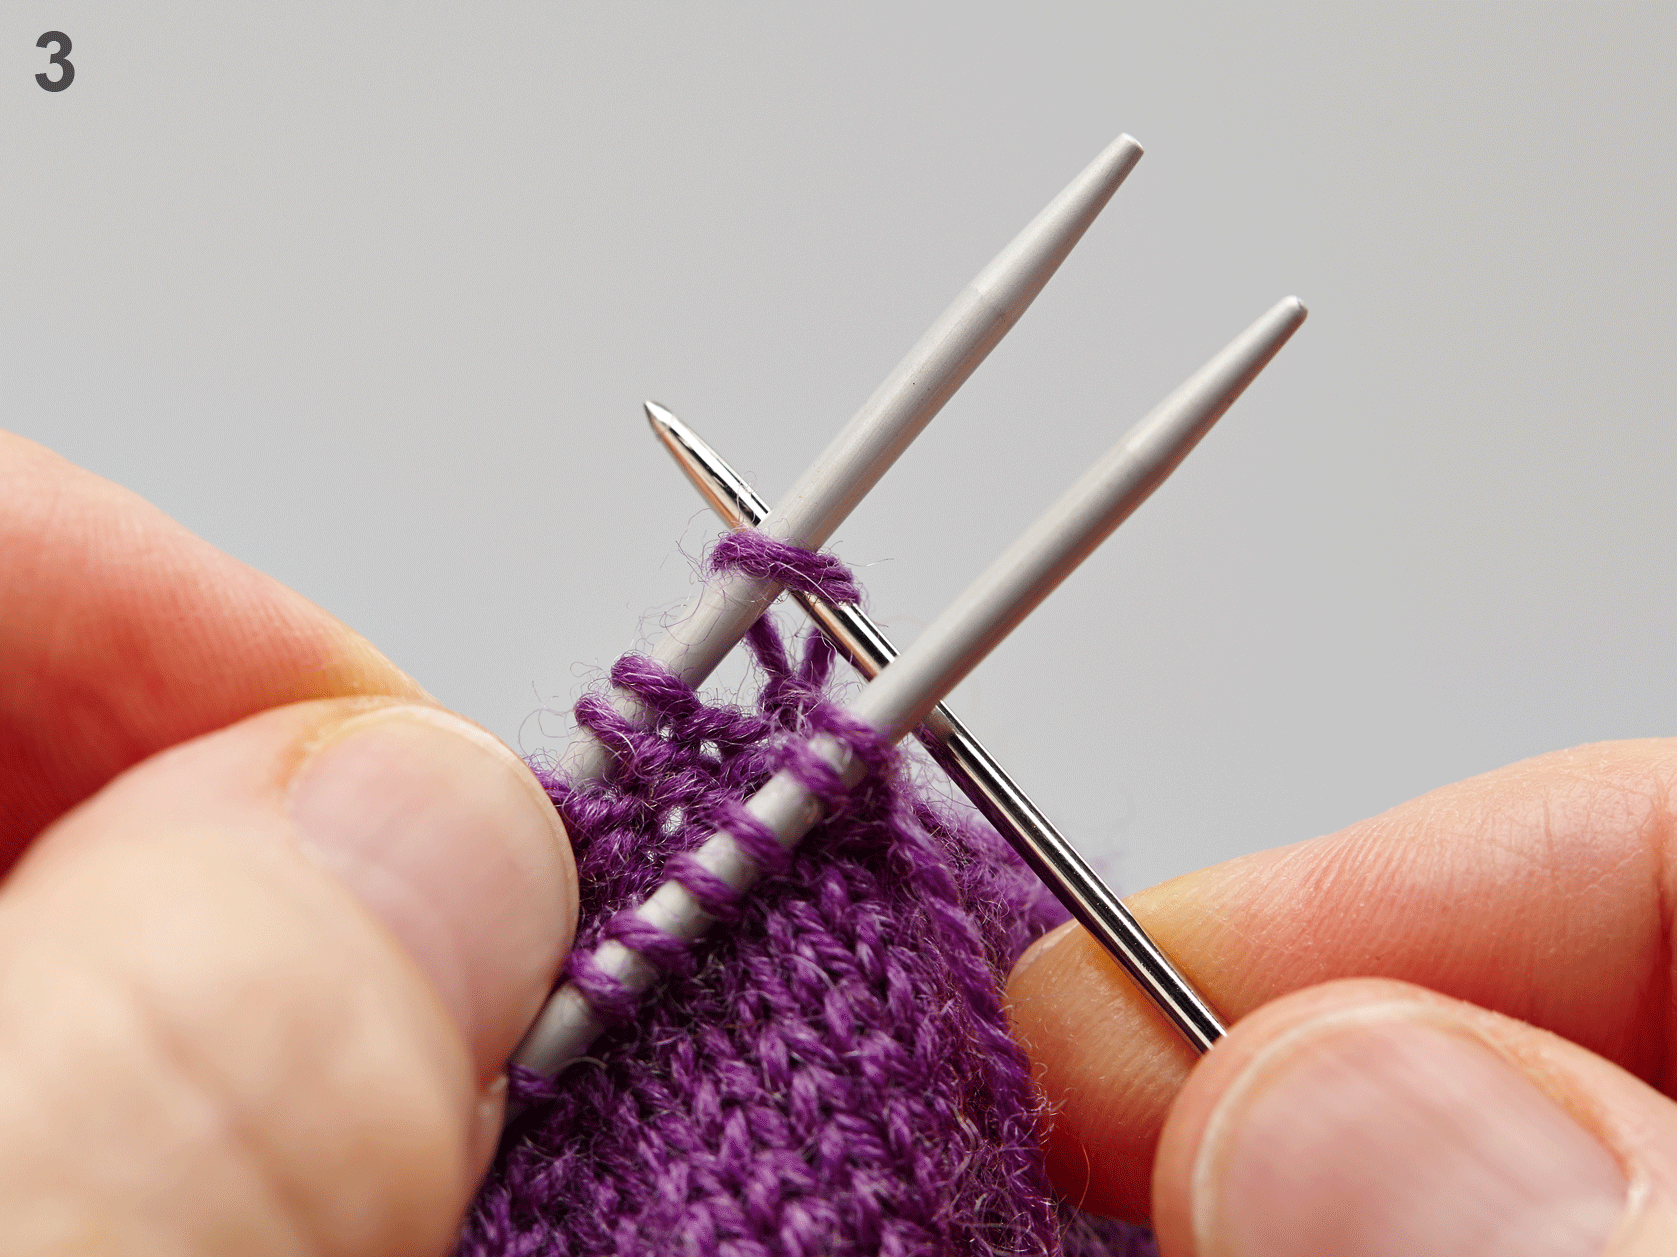 How to graft knitting with Kitchener Stitch tutorial step 3